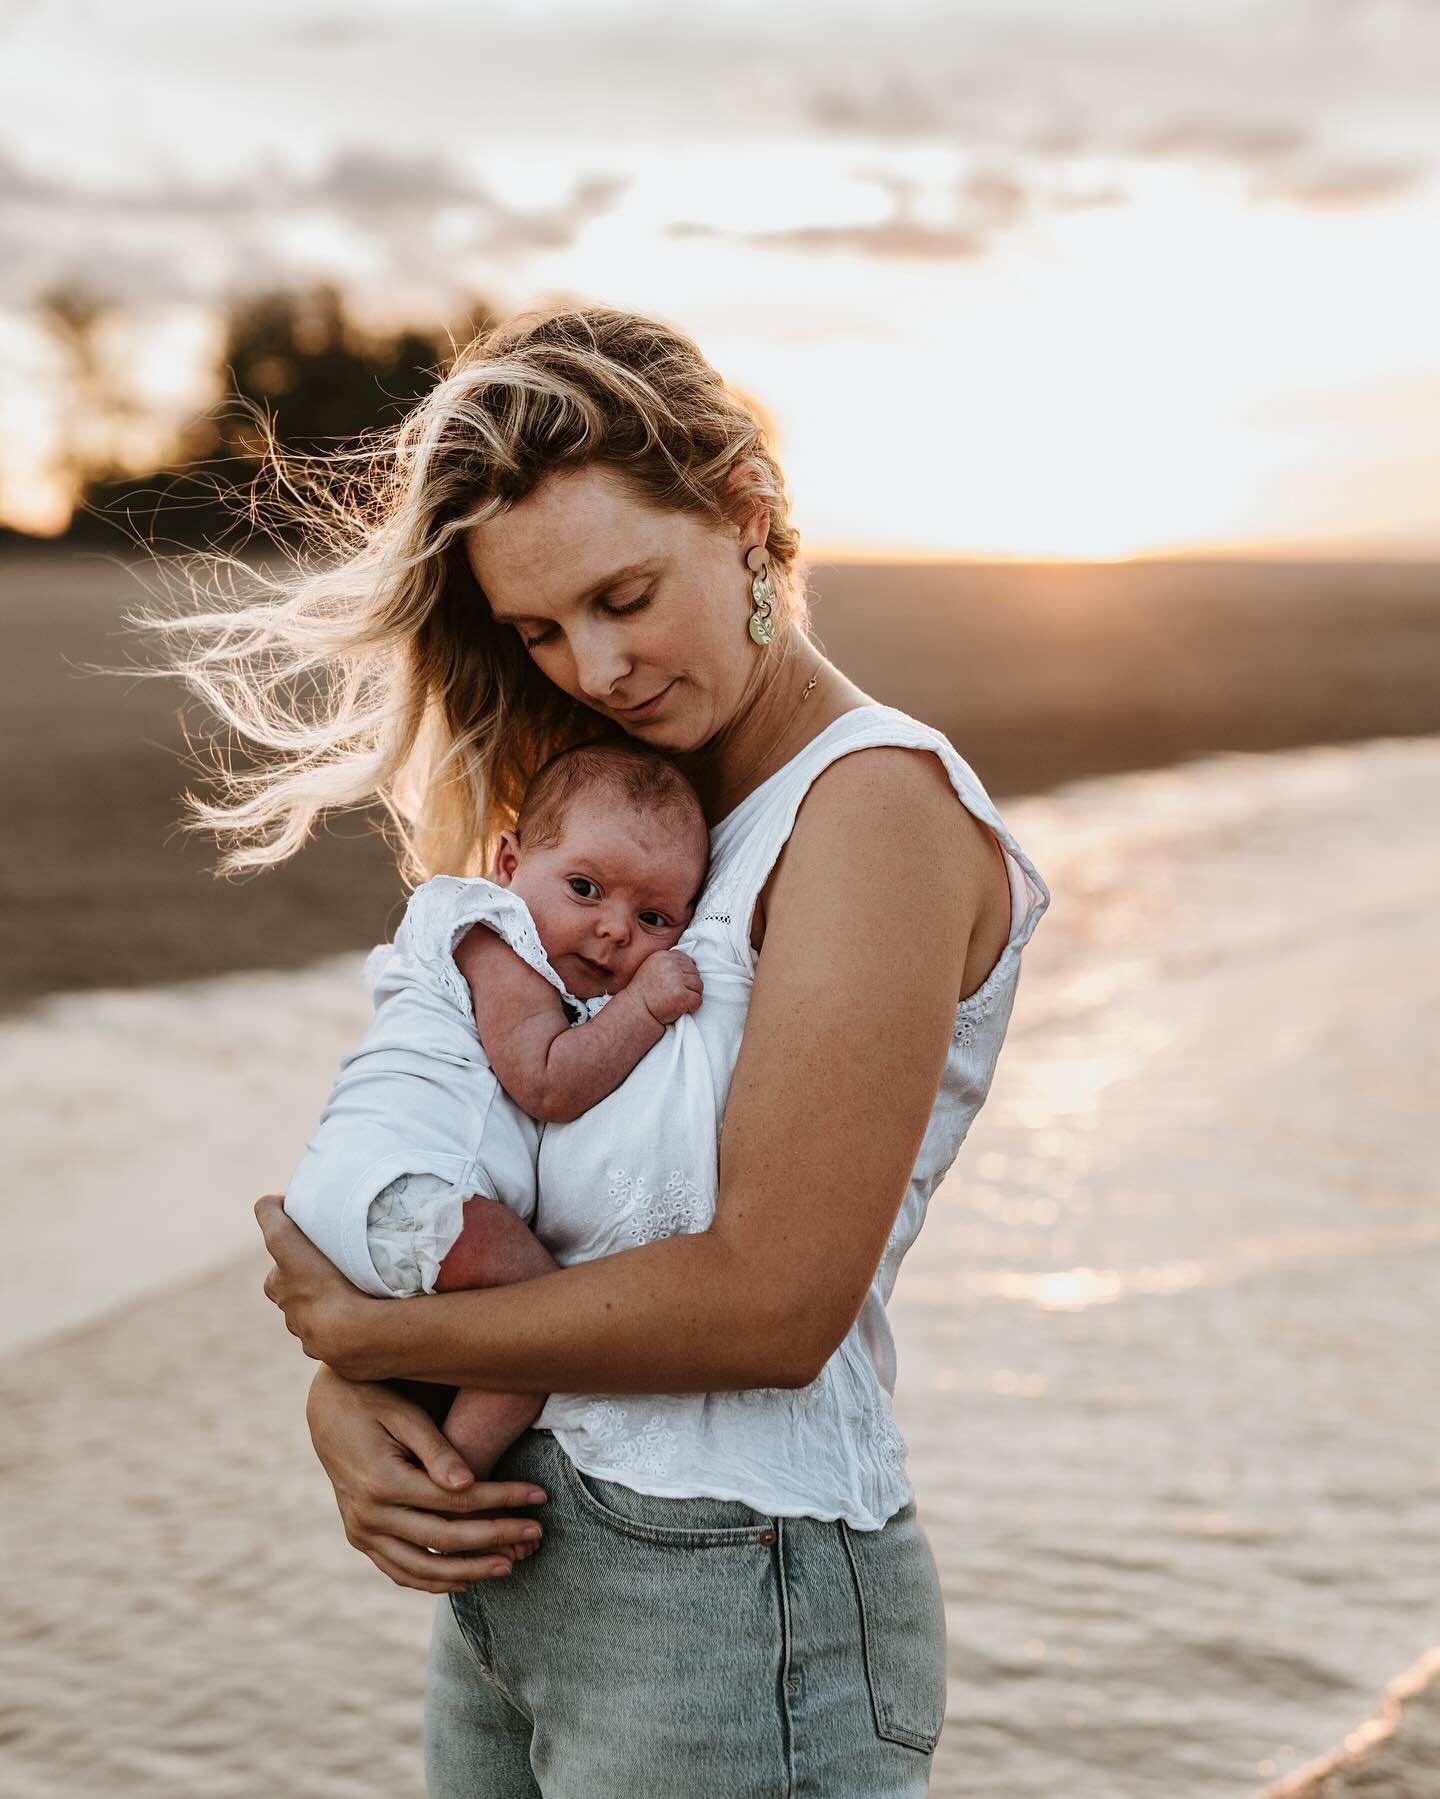 Darling Pippa with her beautiful family 💓 this second baby cuddles just hit different when your first is running around enjoying all of the little things in life 🥹

#darwinphotographer #motherhoodunplugged #thestorytellingtribe
#unscriptedposingapp